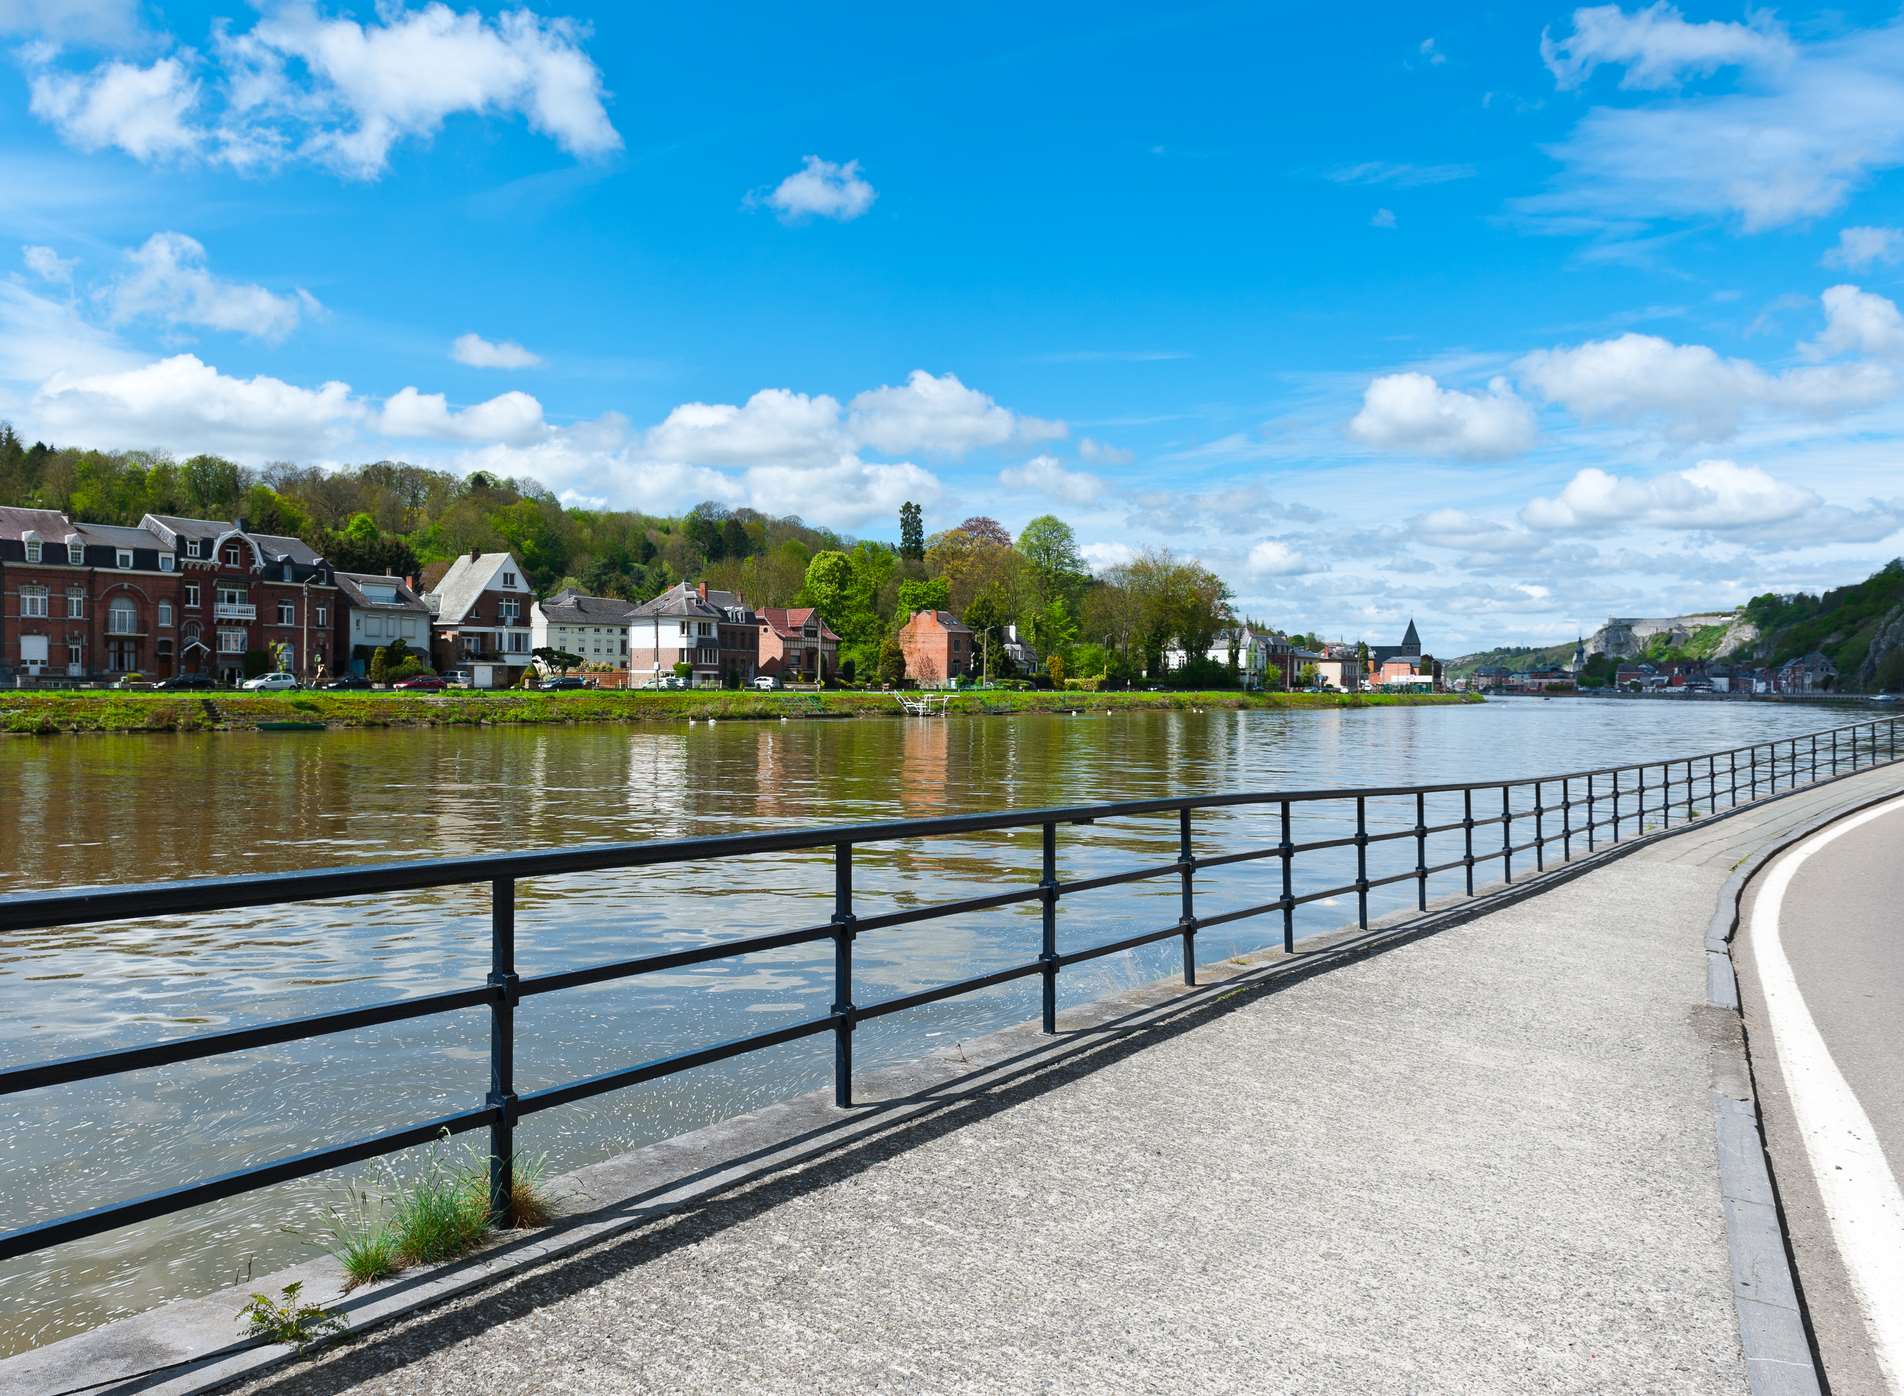 Take a stroll - or even a cycle ride - alongside the river